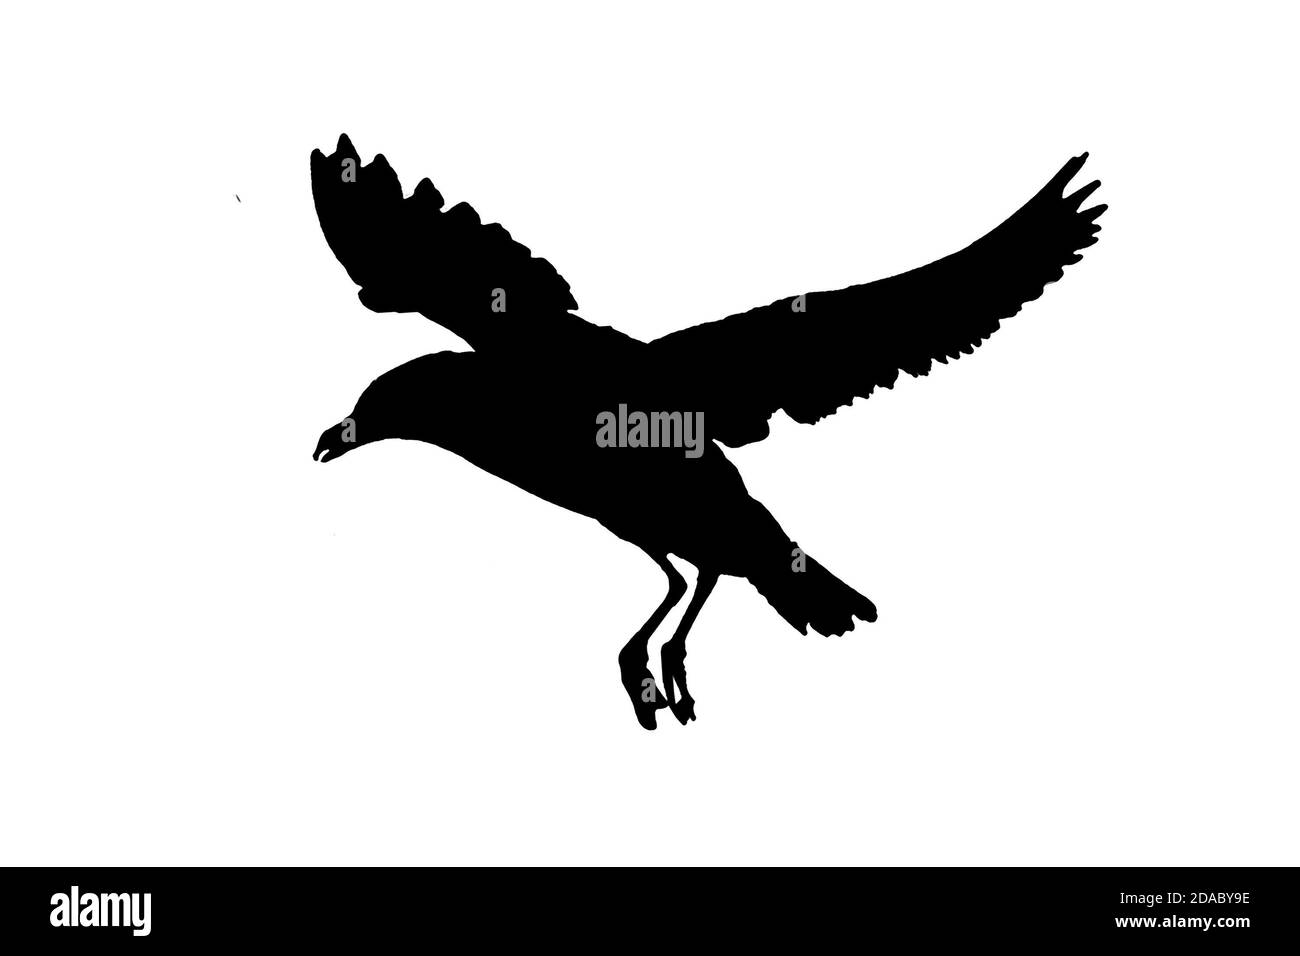 Side view seagull bird flying graphic silhouette isolated on white background photo Stock Photo